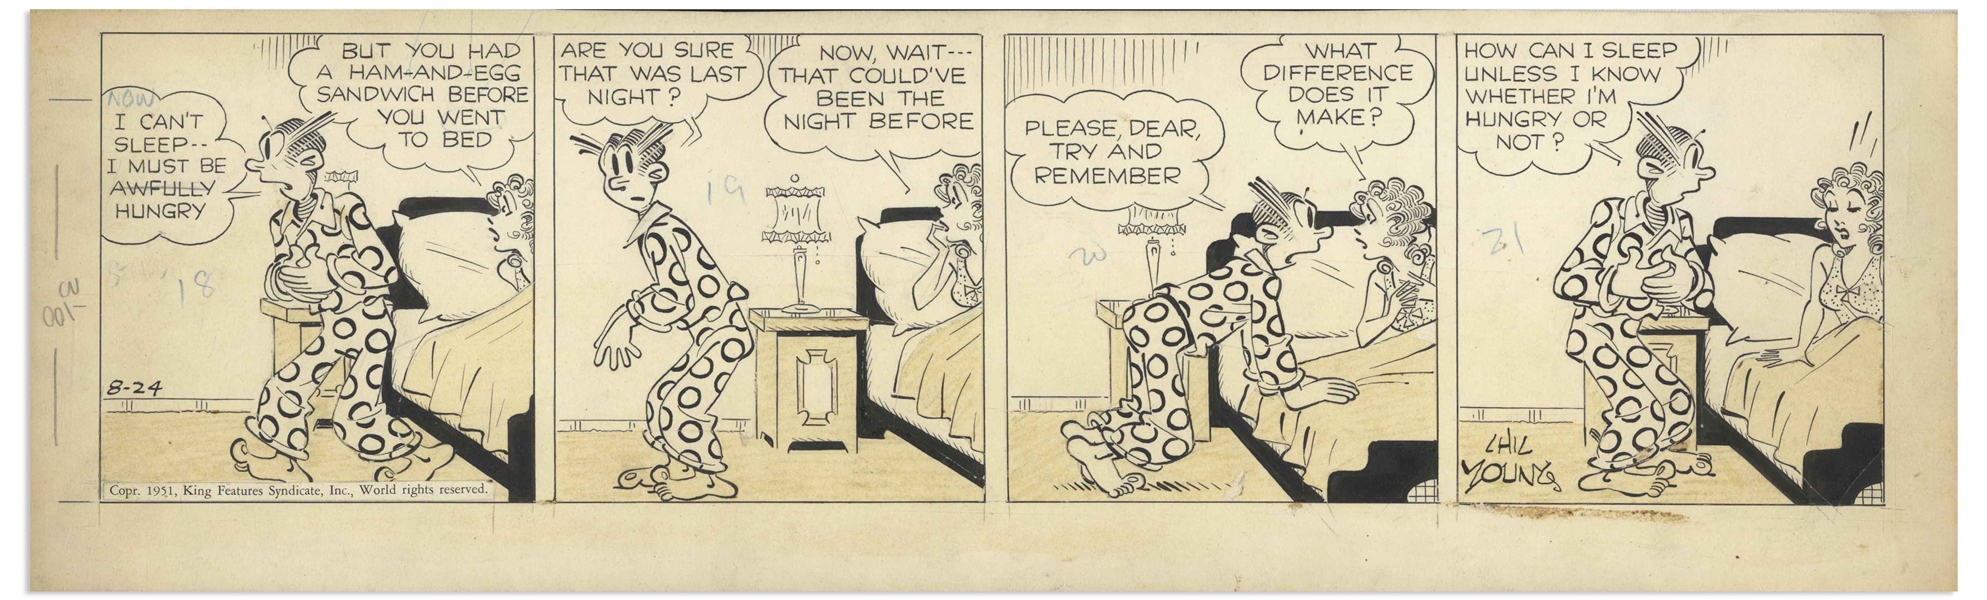 Chic Young Hand-Drawn ''Blondie'' Comic Strip From 1951 Titled ''The Case Calls for X-Rays!'' -- Dagwood's Midnight Snack Attack